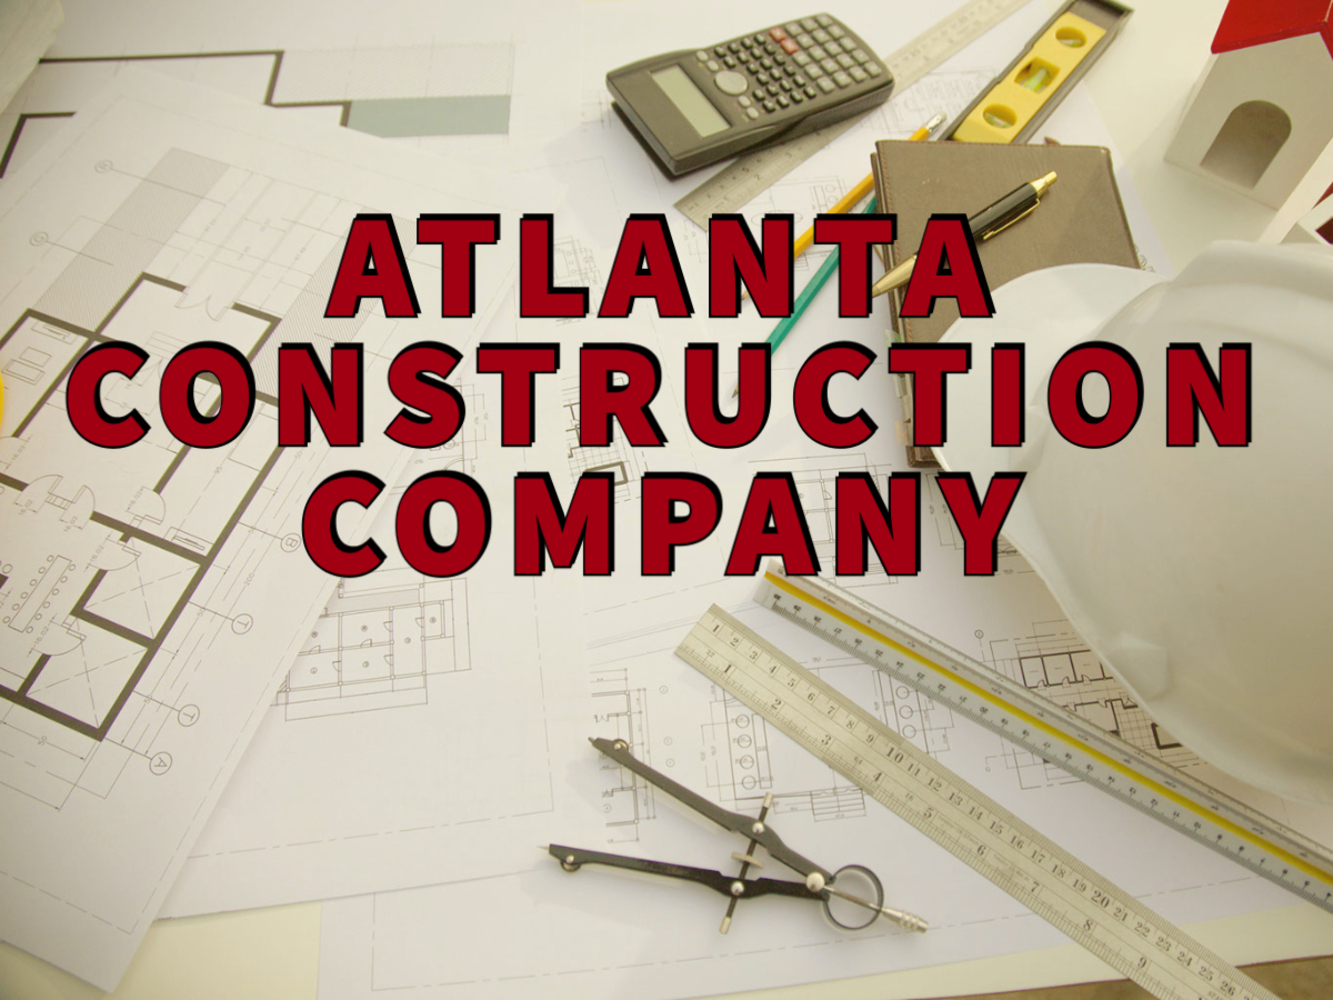 Atlanta construction company written in red over table with blueprints, calculator, and hardhat